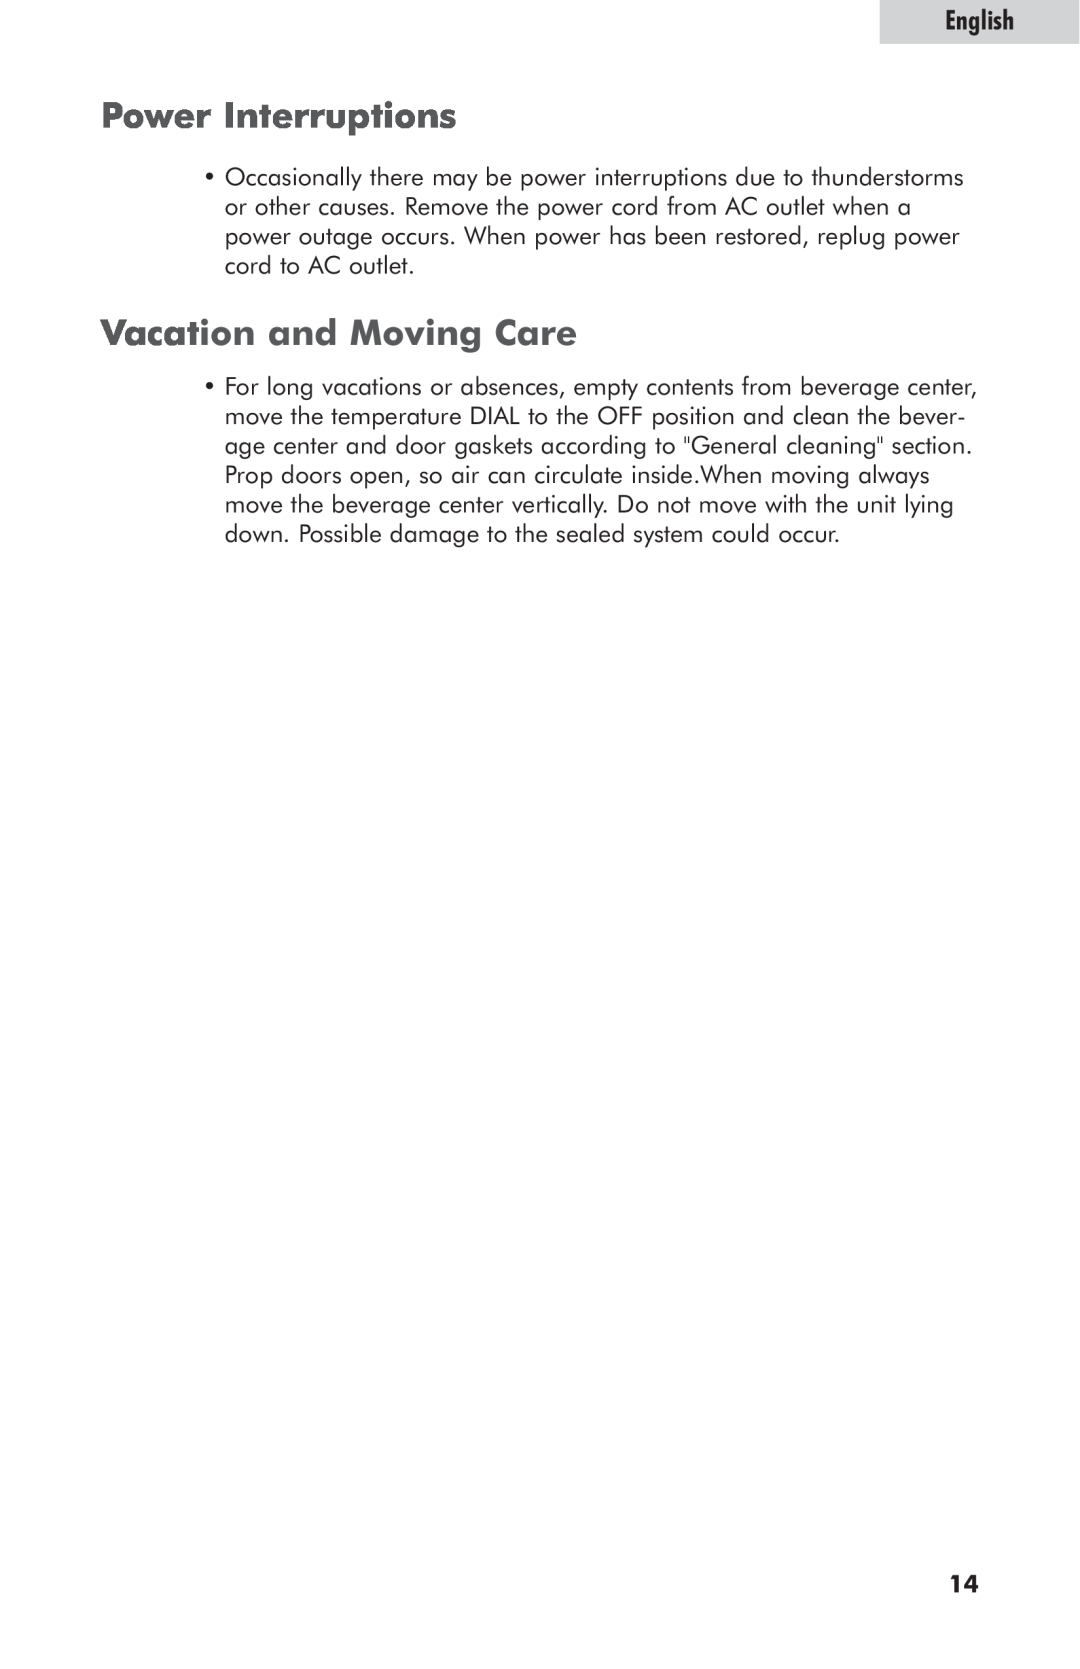 Haier hc125fvs user manual Power Interruptions, Vacation and Moving Care, English 